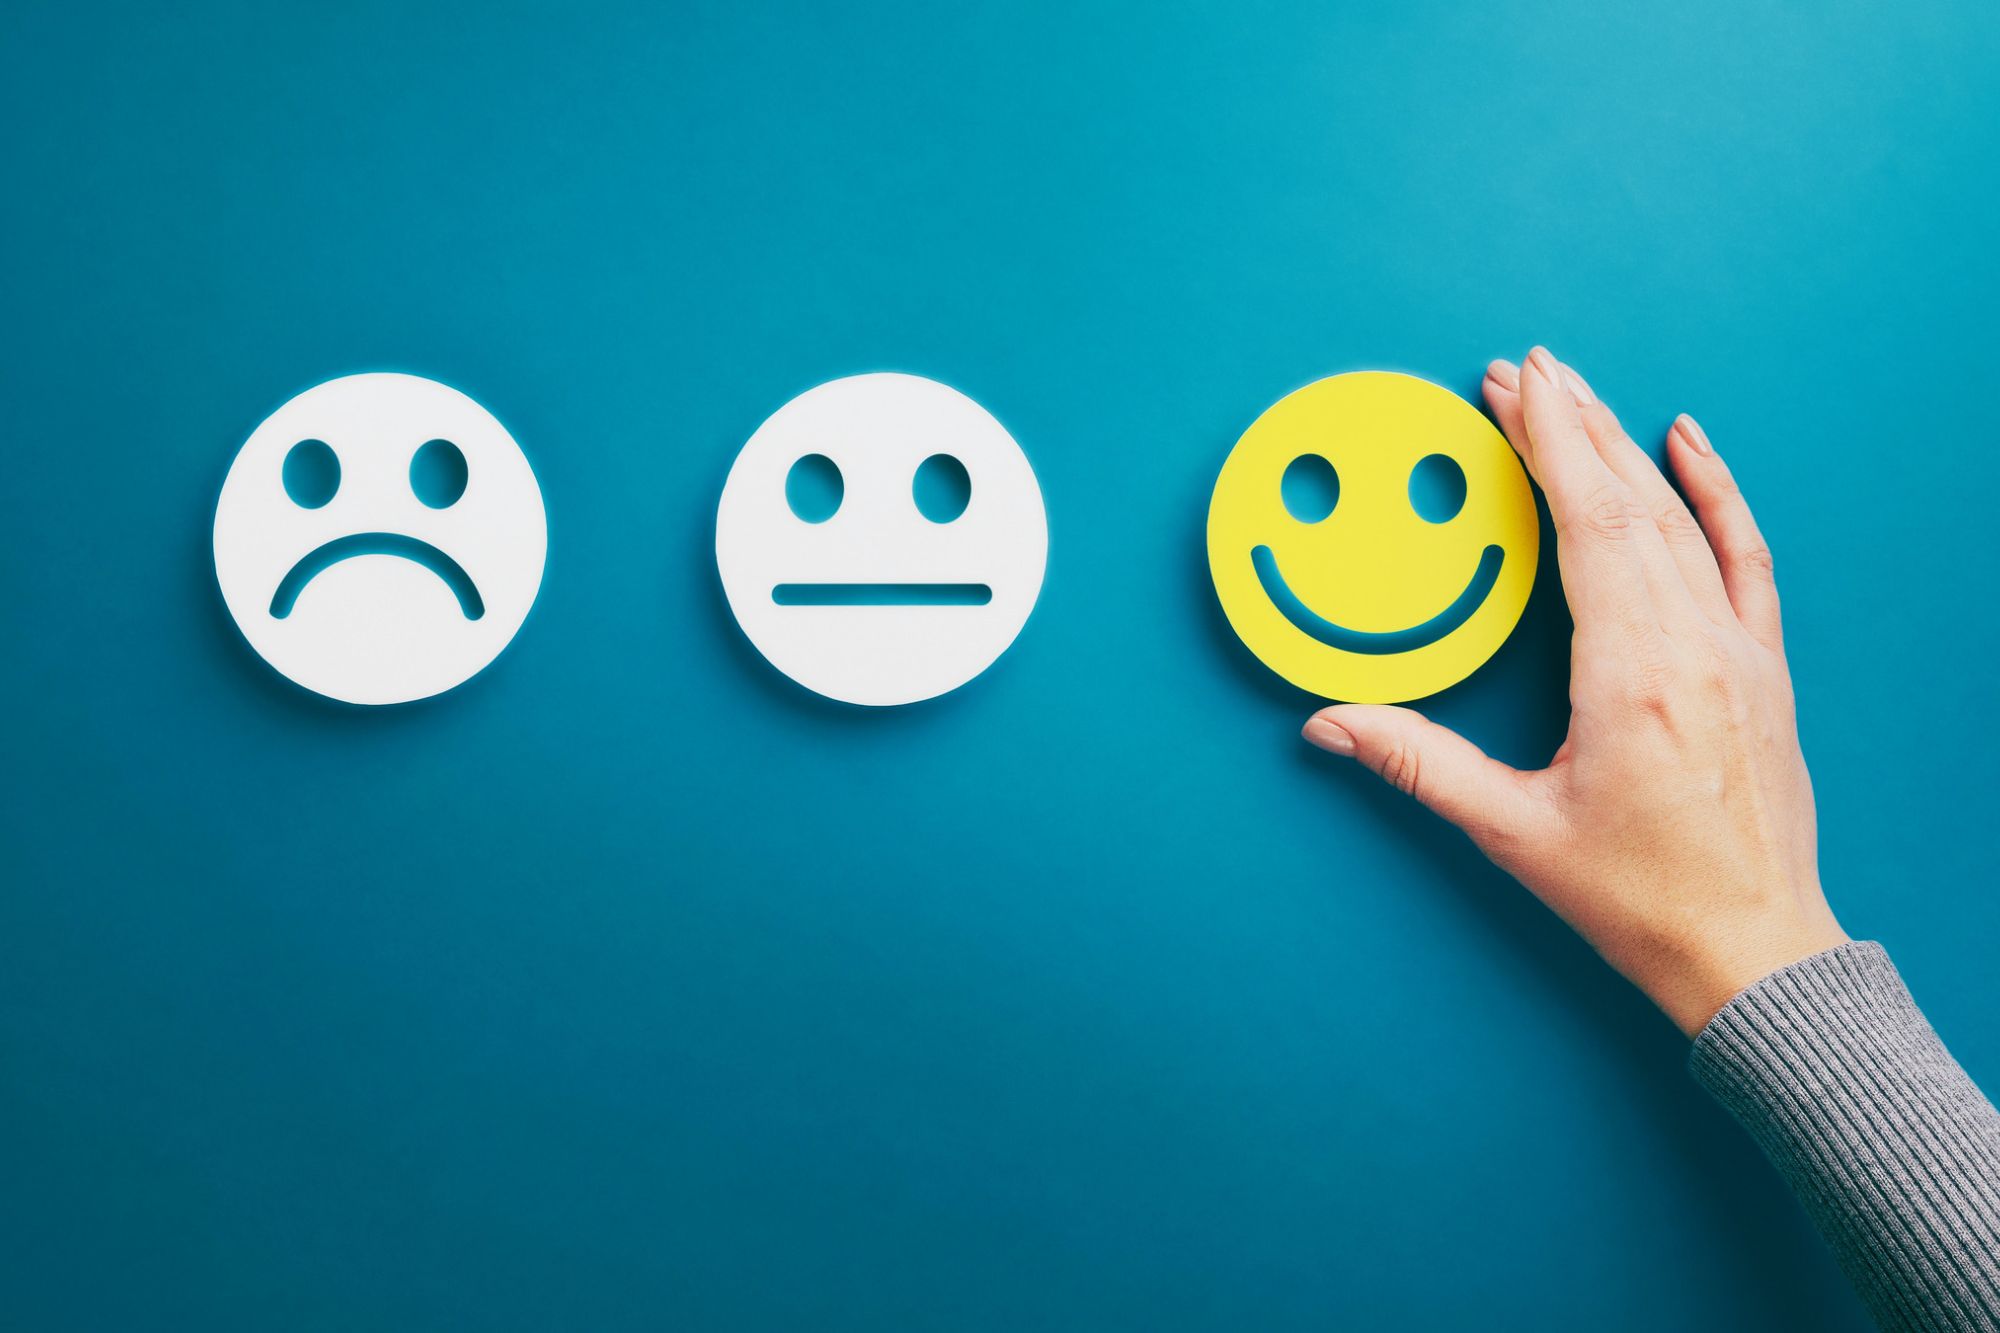 Depicting Finding Hope Is The Key To Moving On After Divorce with a sad face icon, a neutral face icon and a yellow happy face icon in a row on a blue background. A hand is adjusting the happy face to signify hope.